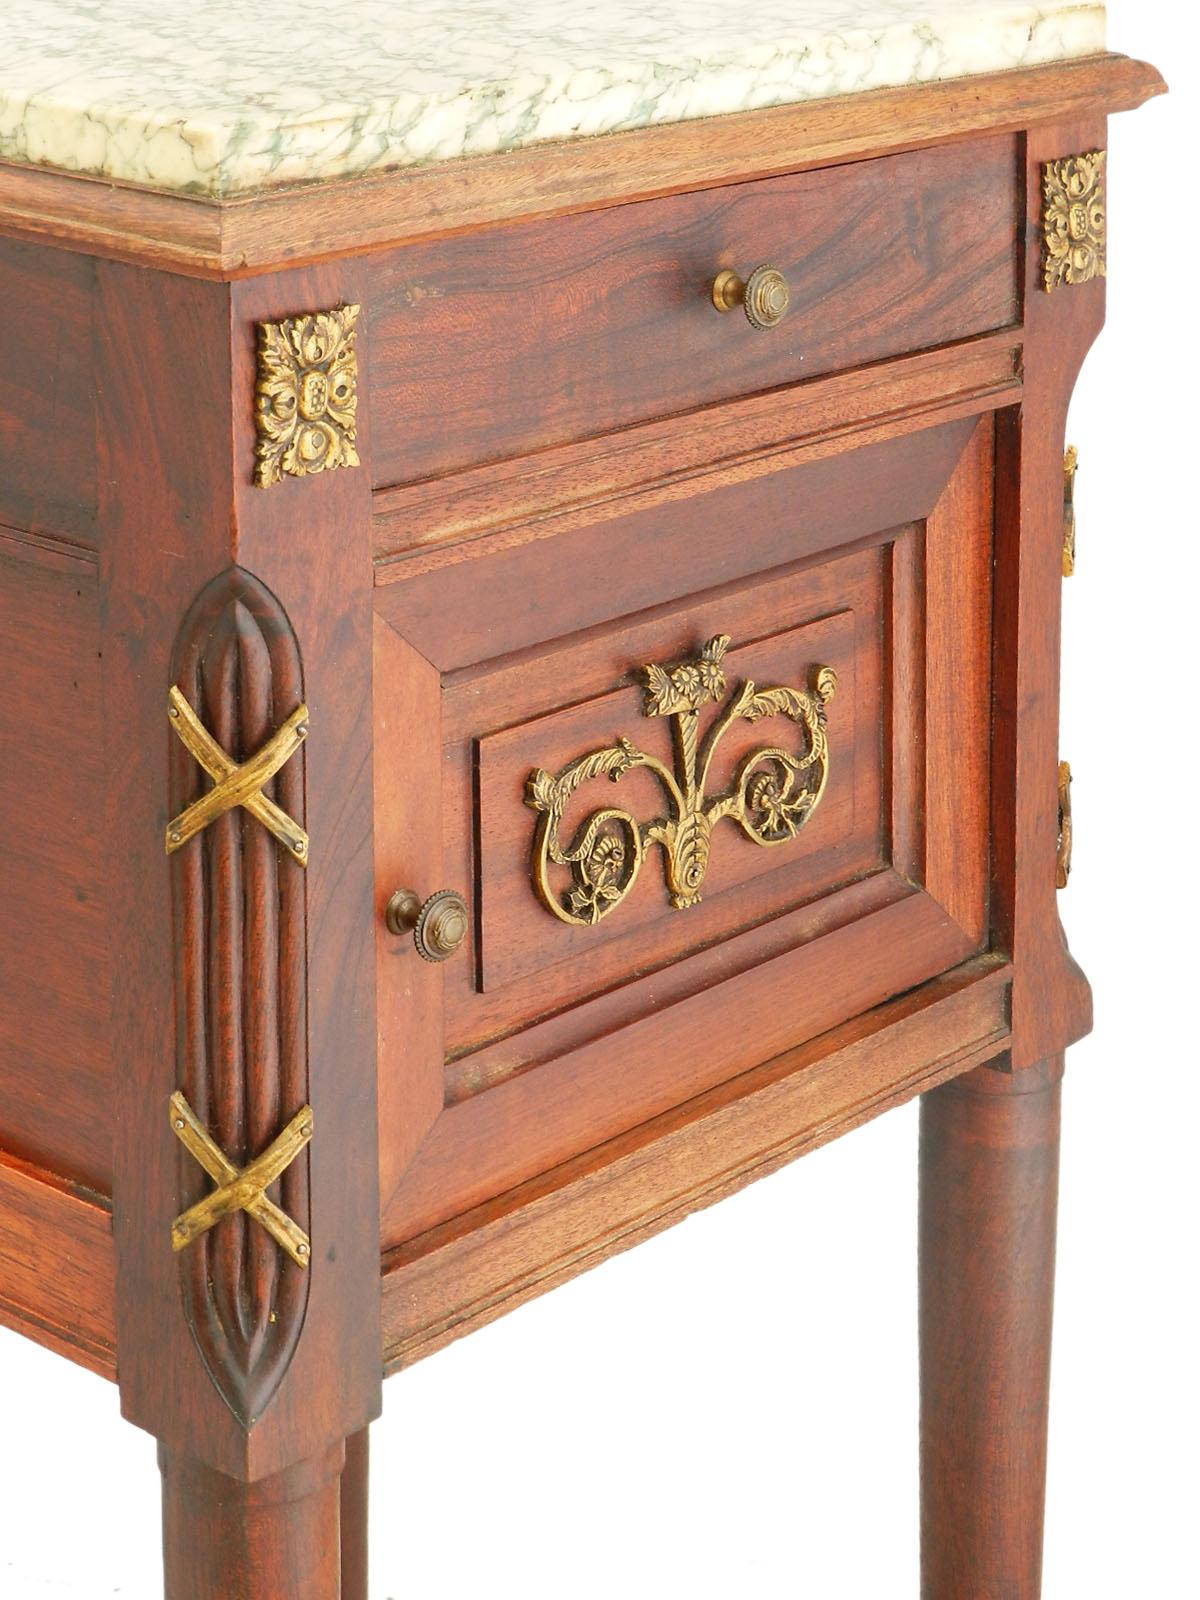 19th century side cabinet French nightstand, bedside table, circa 1880-1890
Solid mahogany with gilt bronze ormolu decoration
Single drawer
Cupboard with porcelain liner that can be removed if preferred
Variegated marble top
As removed from a